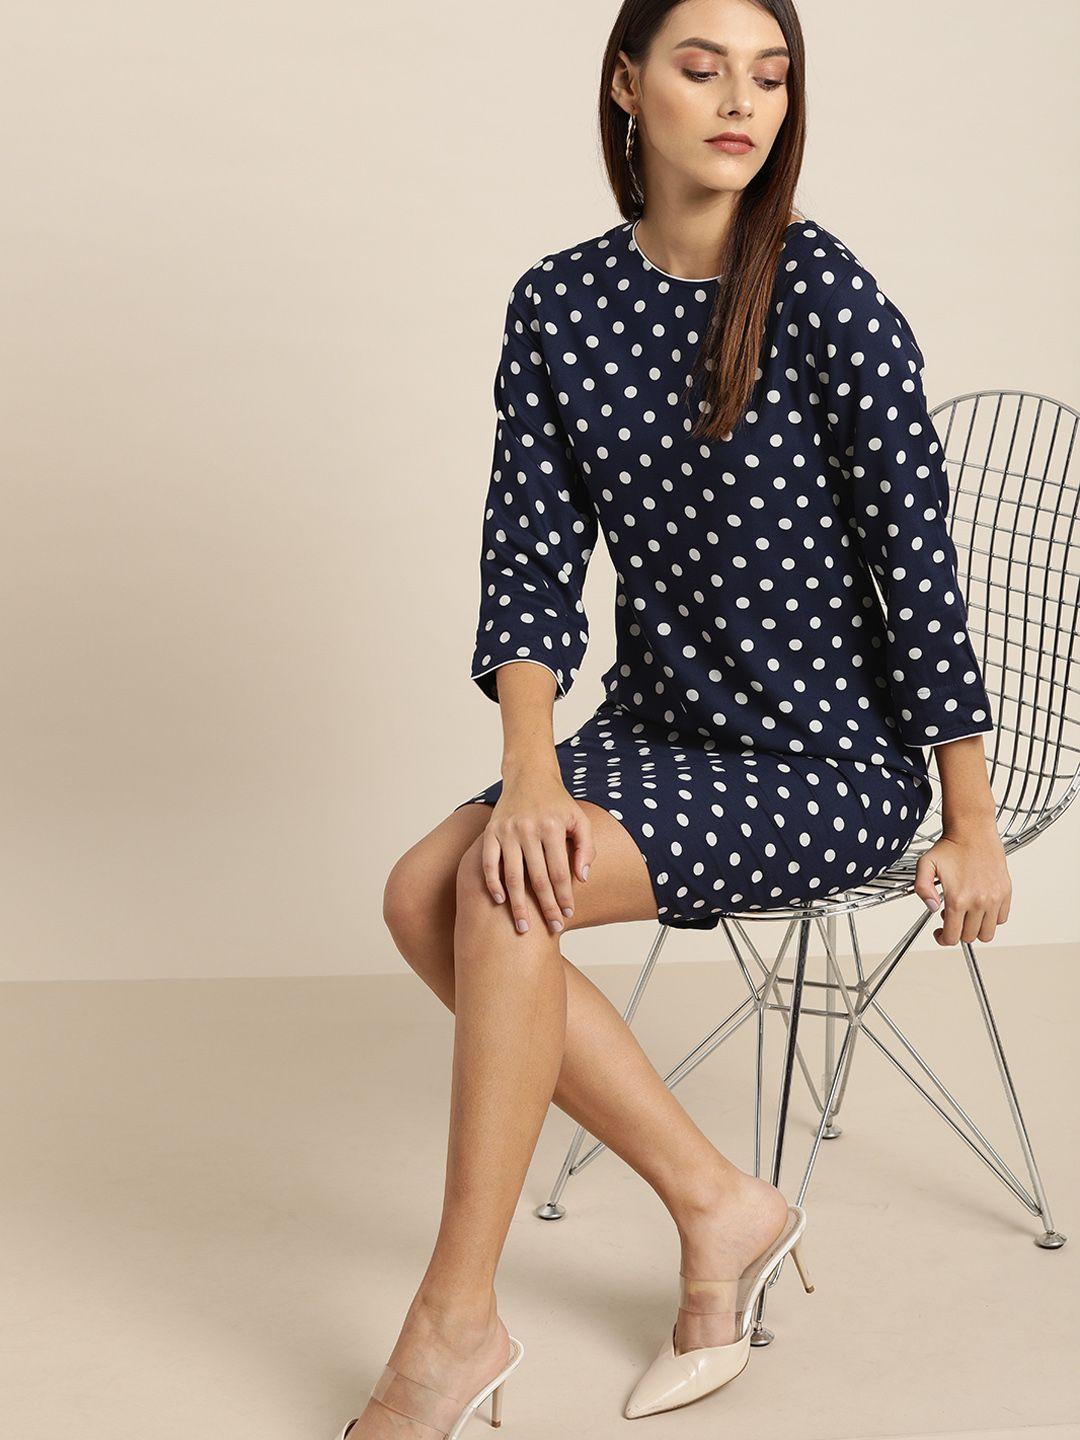 her-by-invictus-women-navy-blue-&-off-white-polka-dots-printed-sheath-dress